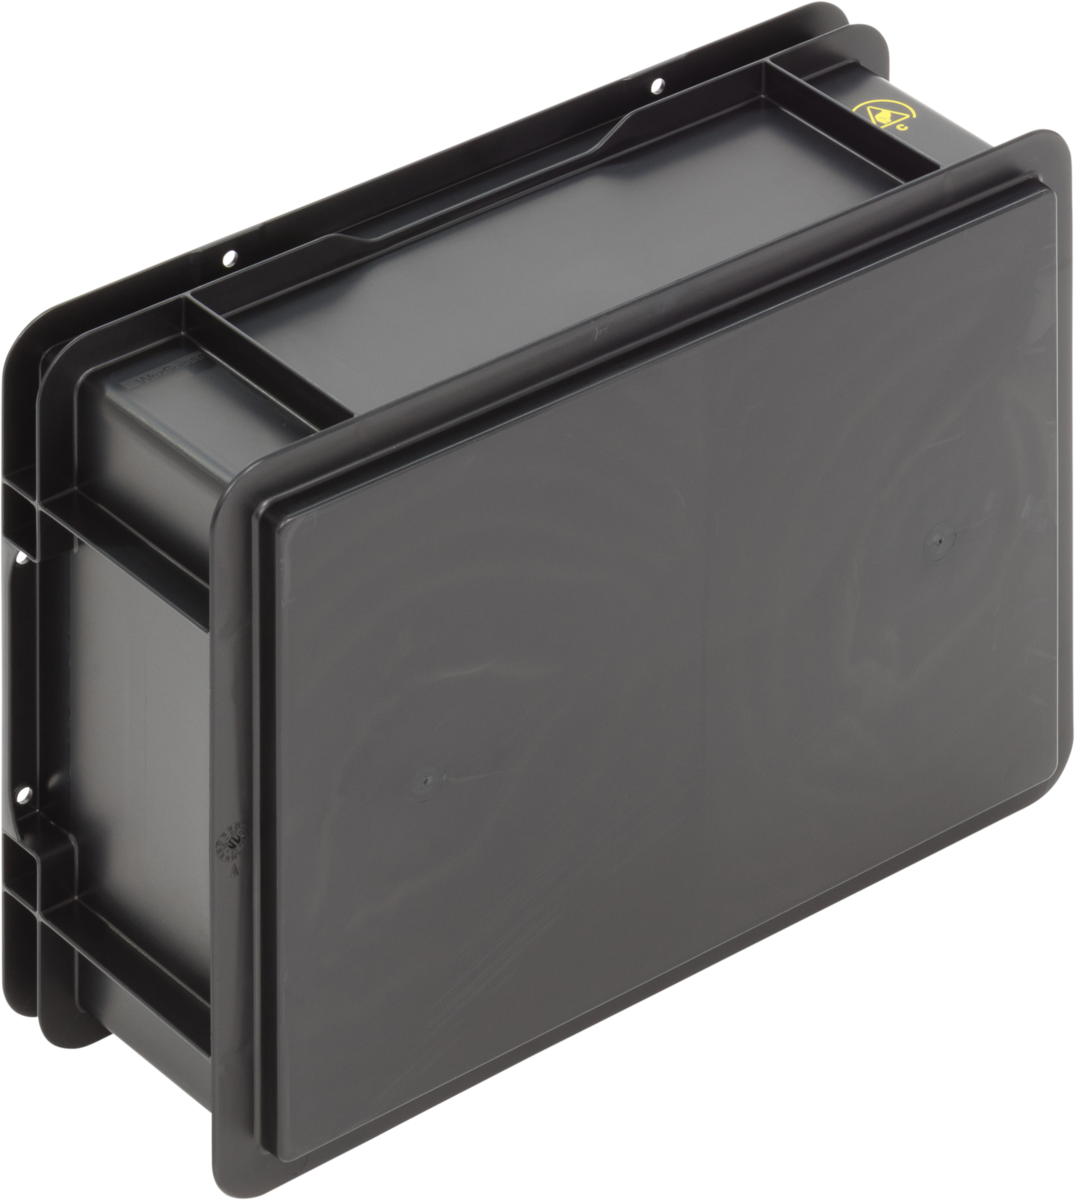 ESD-Safe-SGL-Norm-Stacking-Bin-Containers-Light-Flat-Base-Ref.-4313.097.992_1004371_400x300x145_02